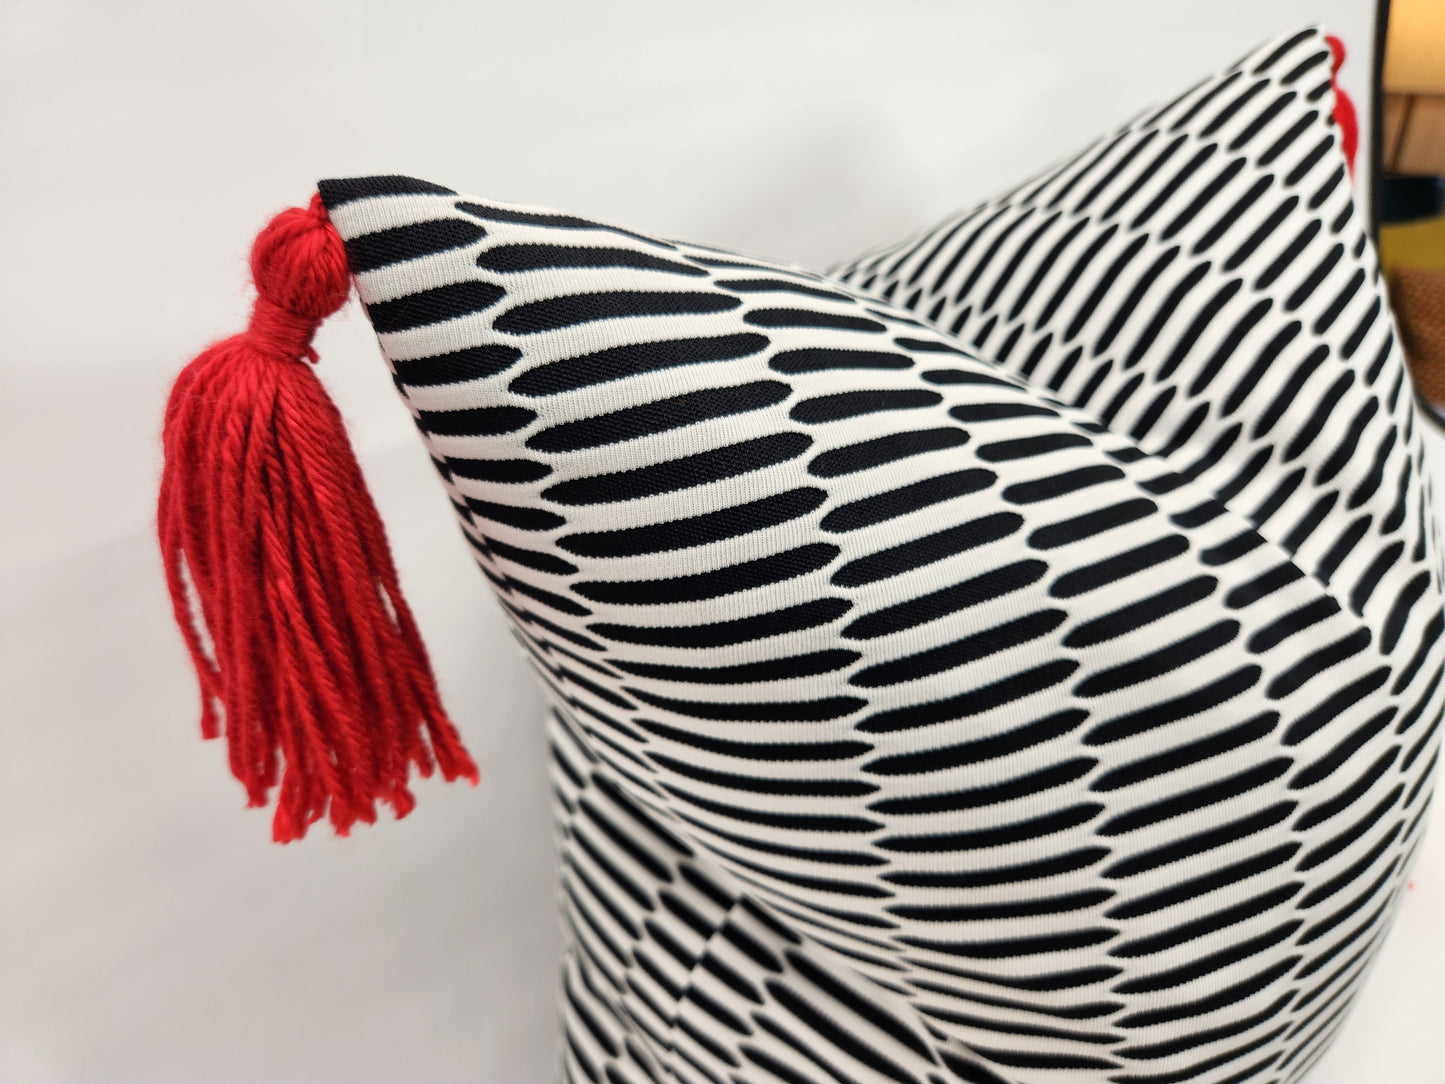 Vintage 1970s Black & White Double Knit Pillow with Red Tassels 20"